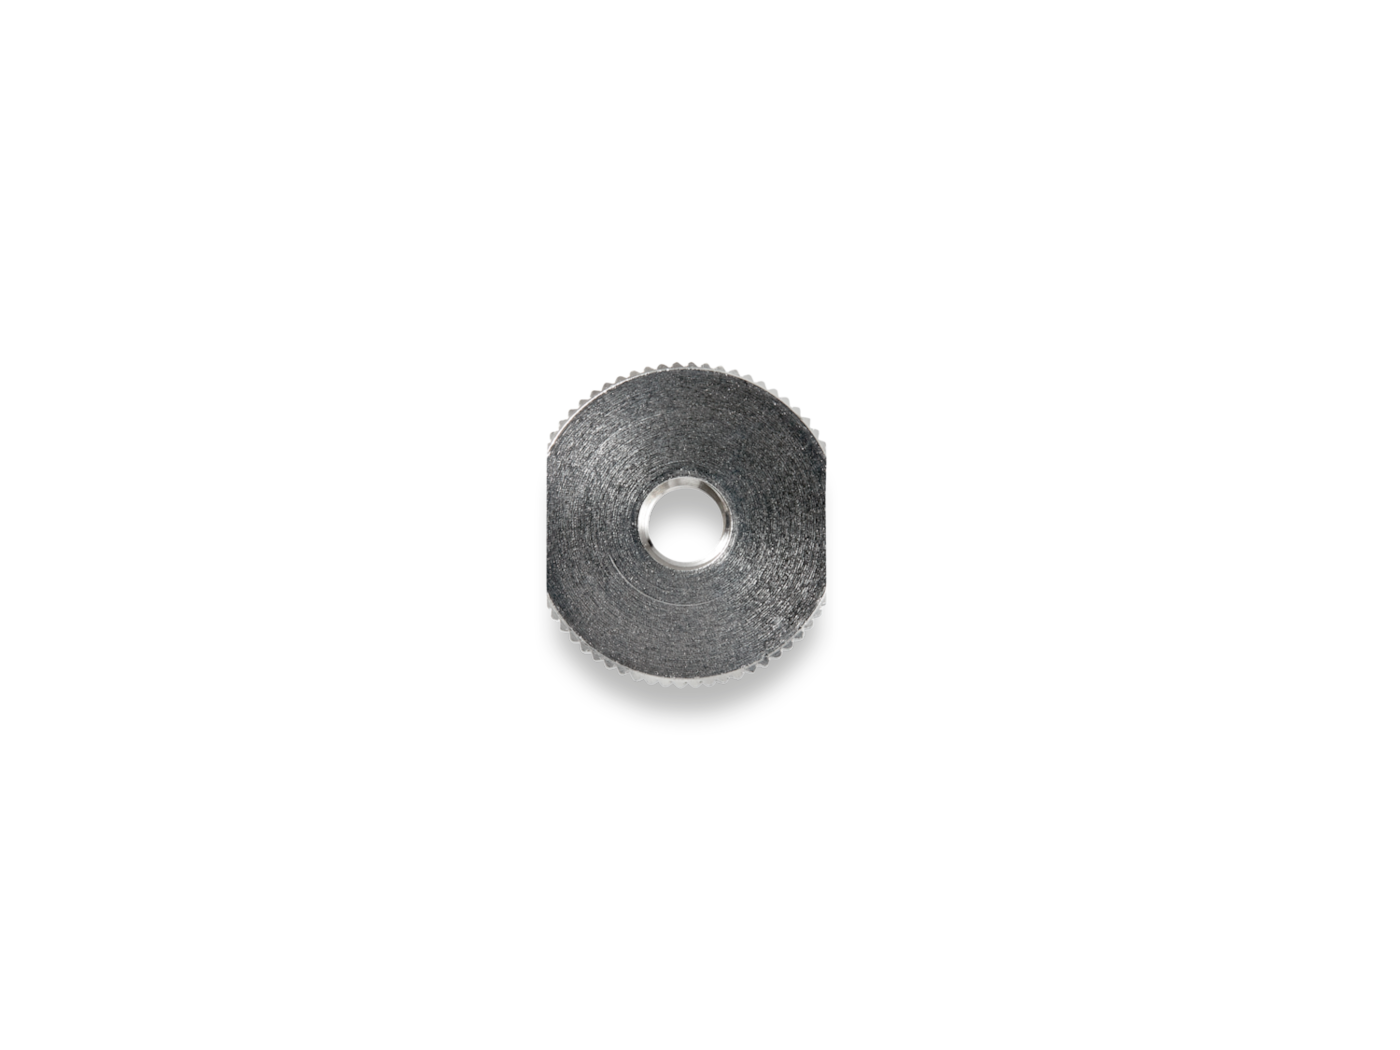 Miele Oven Knurled nut - Spare Part 4057430  product photo